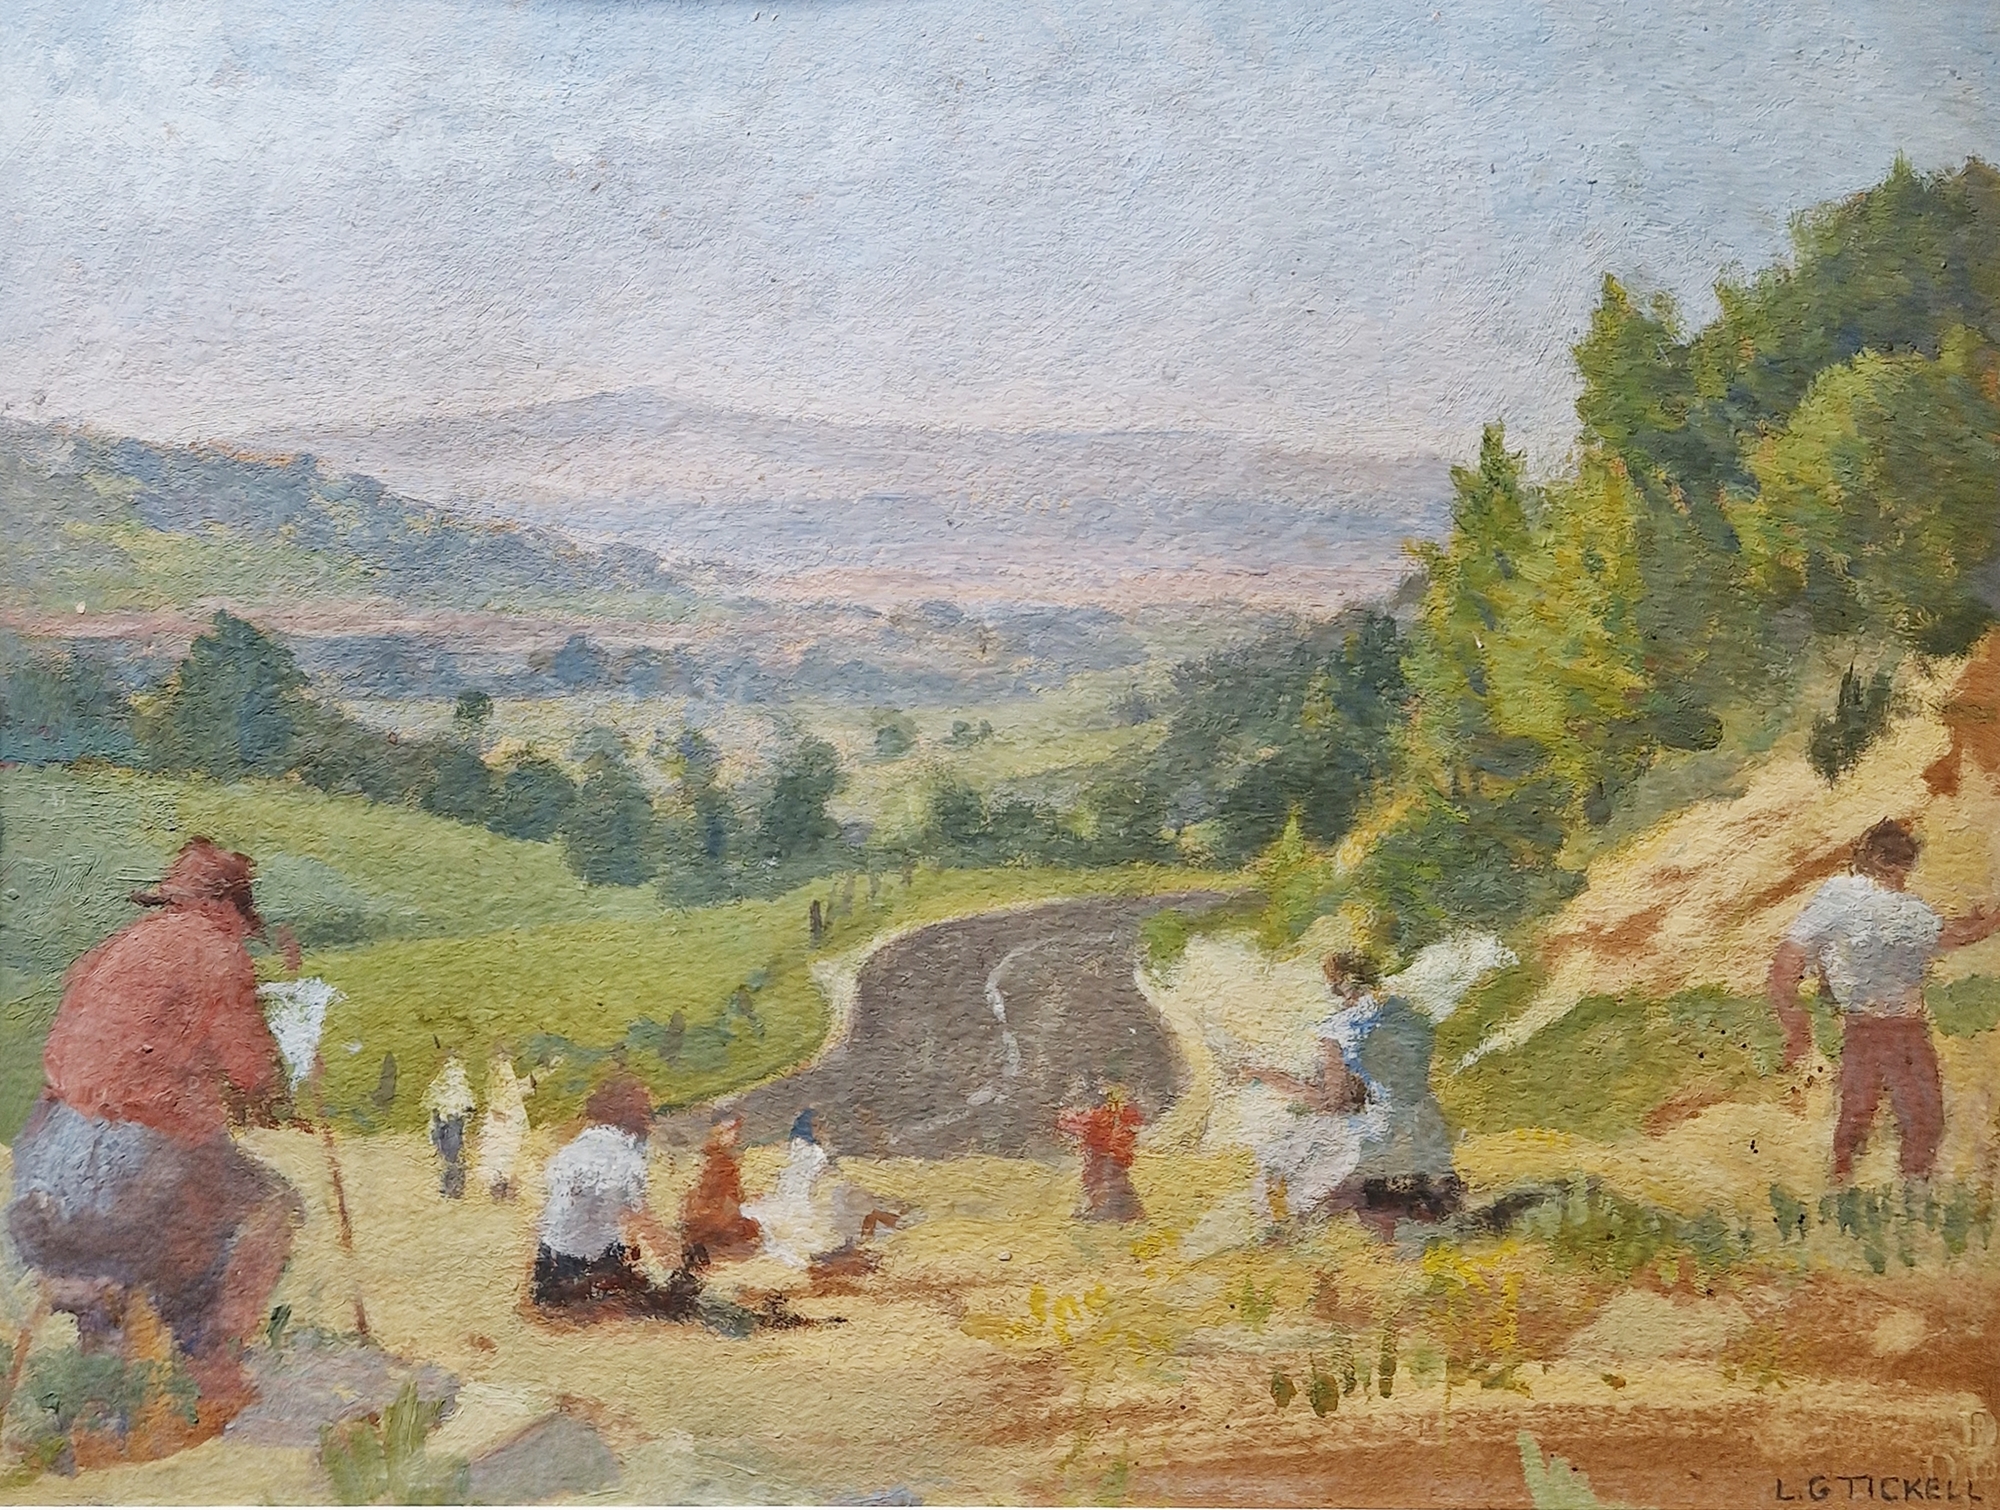 L G Tickell (20th century) Oil on card "The Sketching Class", signed lower right, 25.5cm x 33cm,